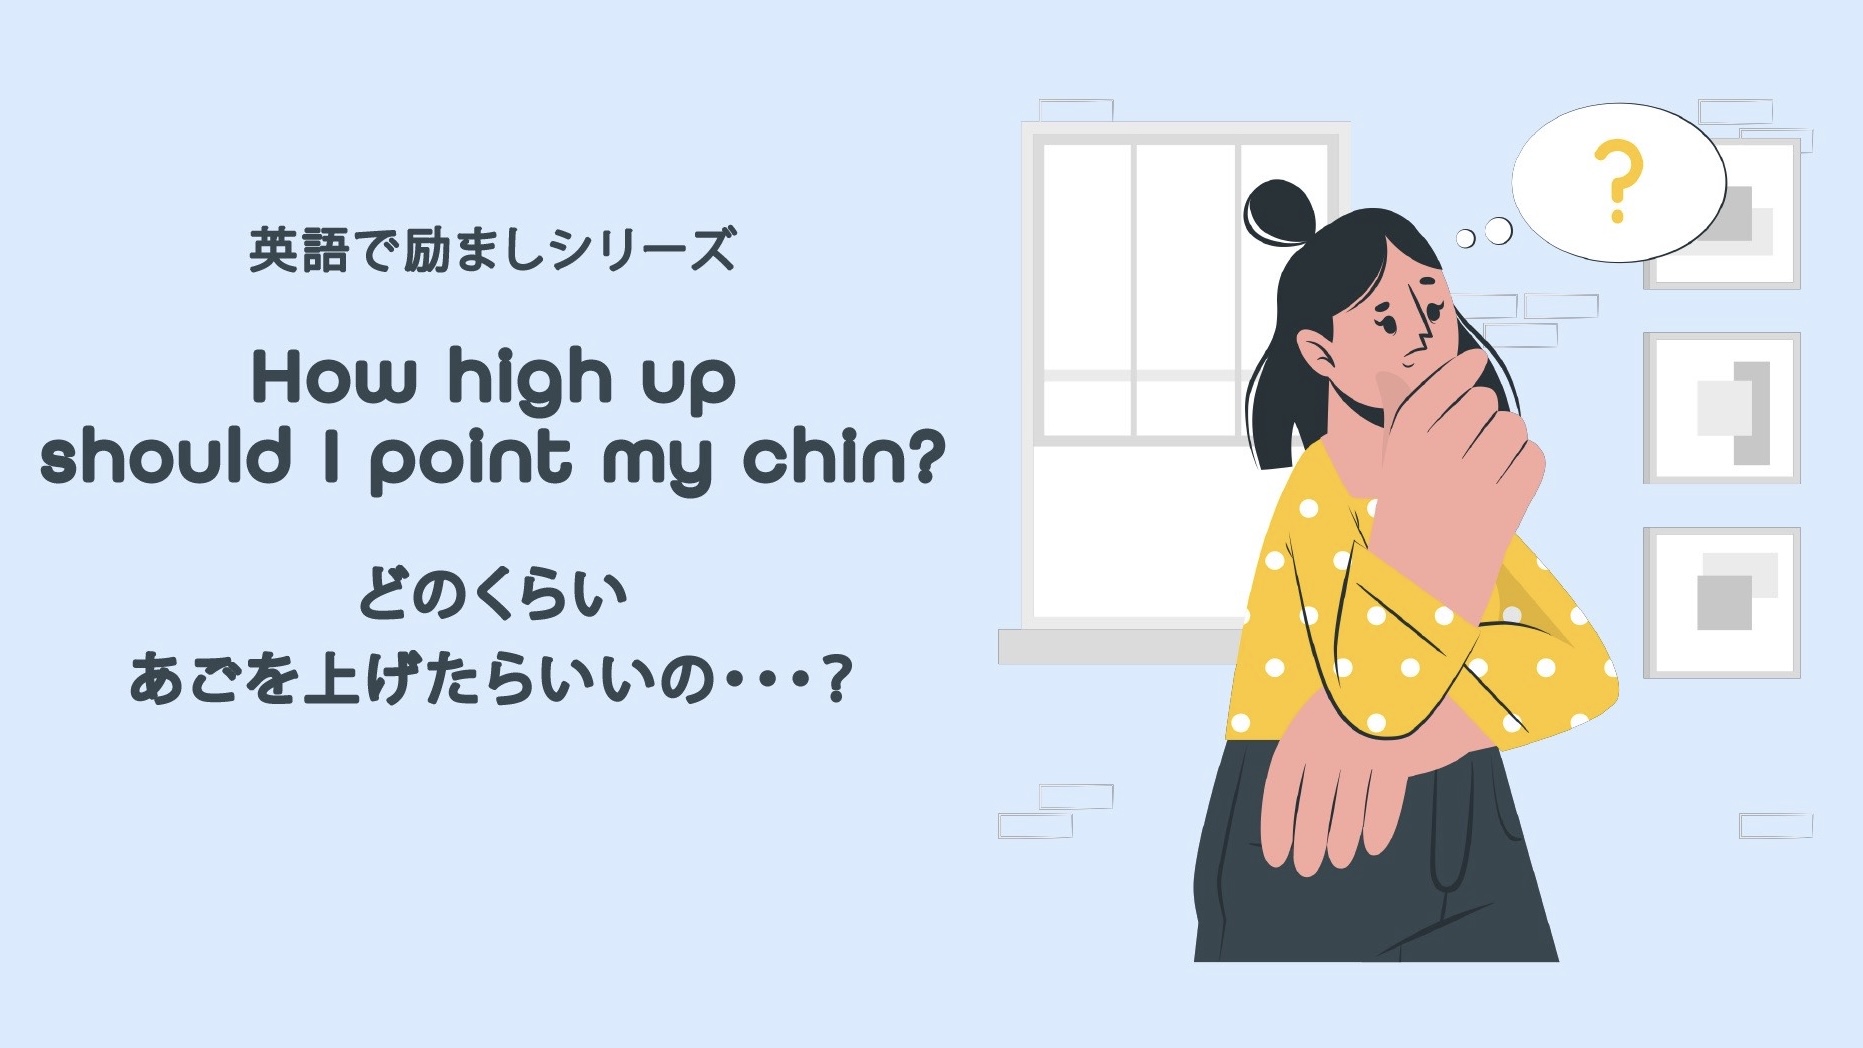 Featured image for “Keep your chin up 意味 – どのくらいあごを上げたらいいの・・・？”